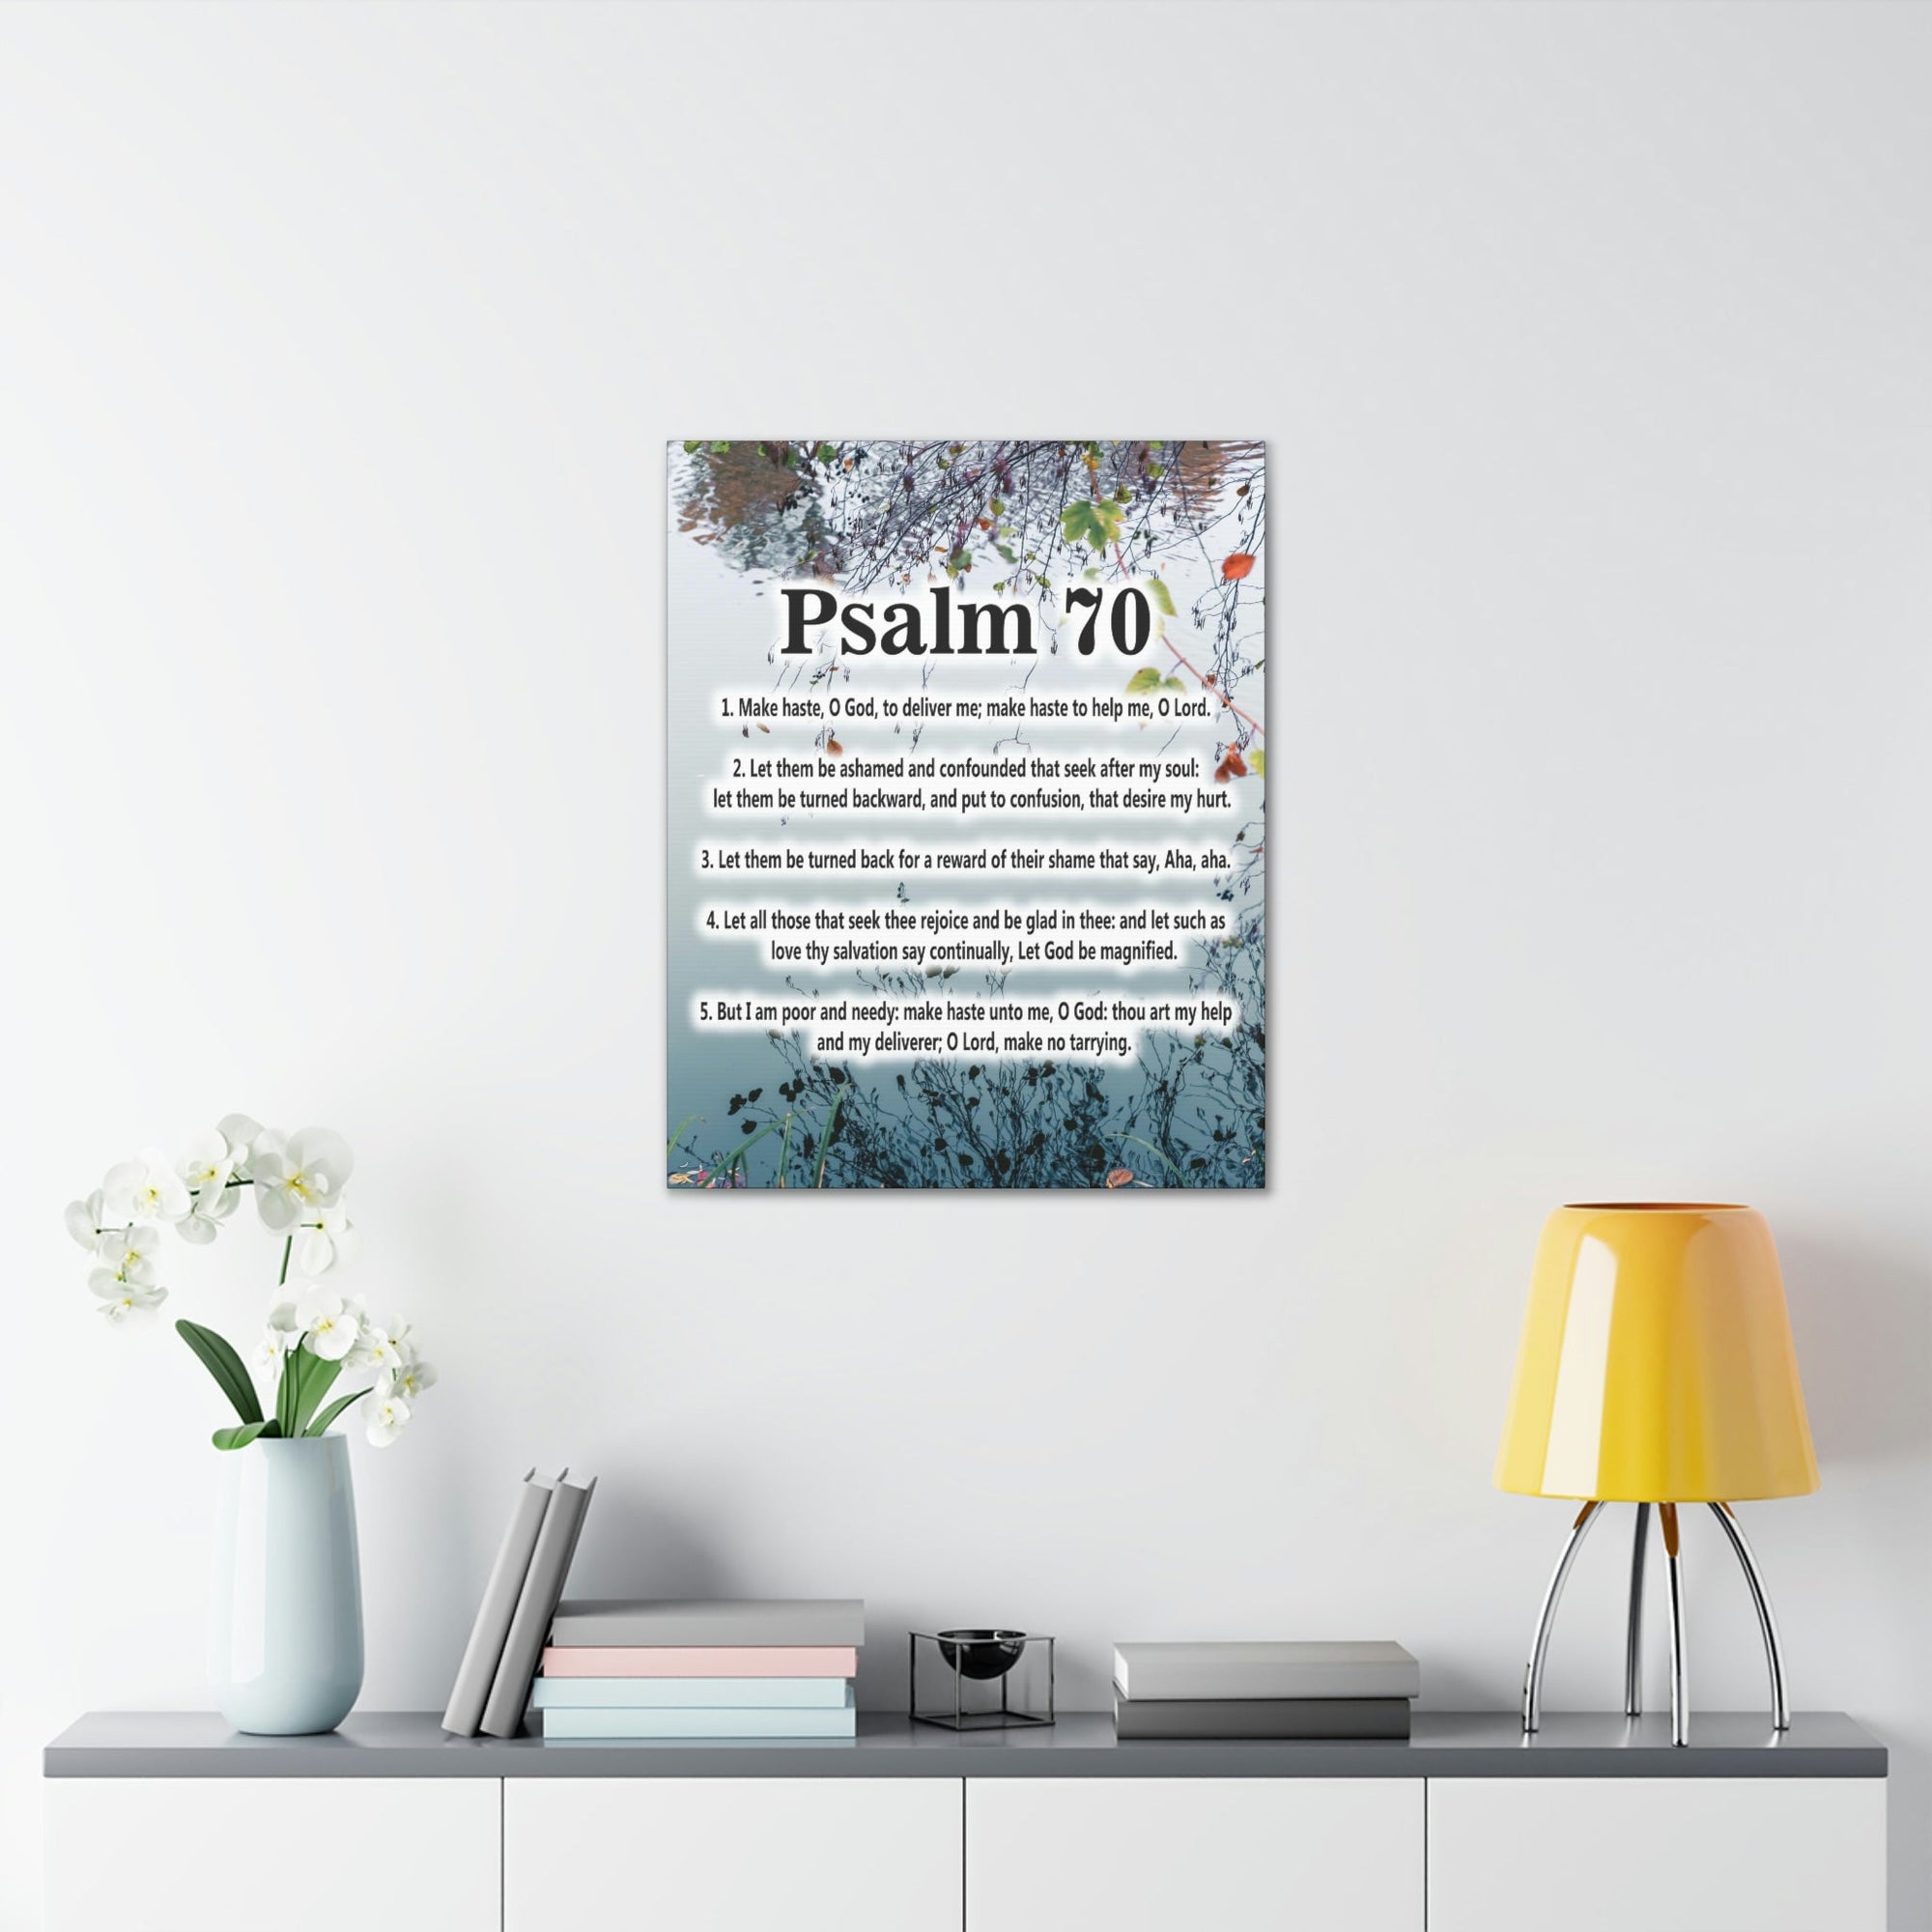 Scripture Walls Make Haste Psalm 70:1 Christian Wall Art Bible Verse Print Ready to Hang Unframed-Express Your Love Gifts